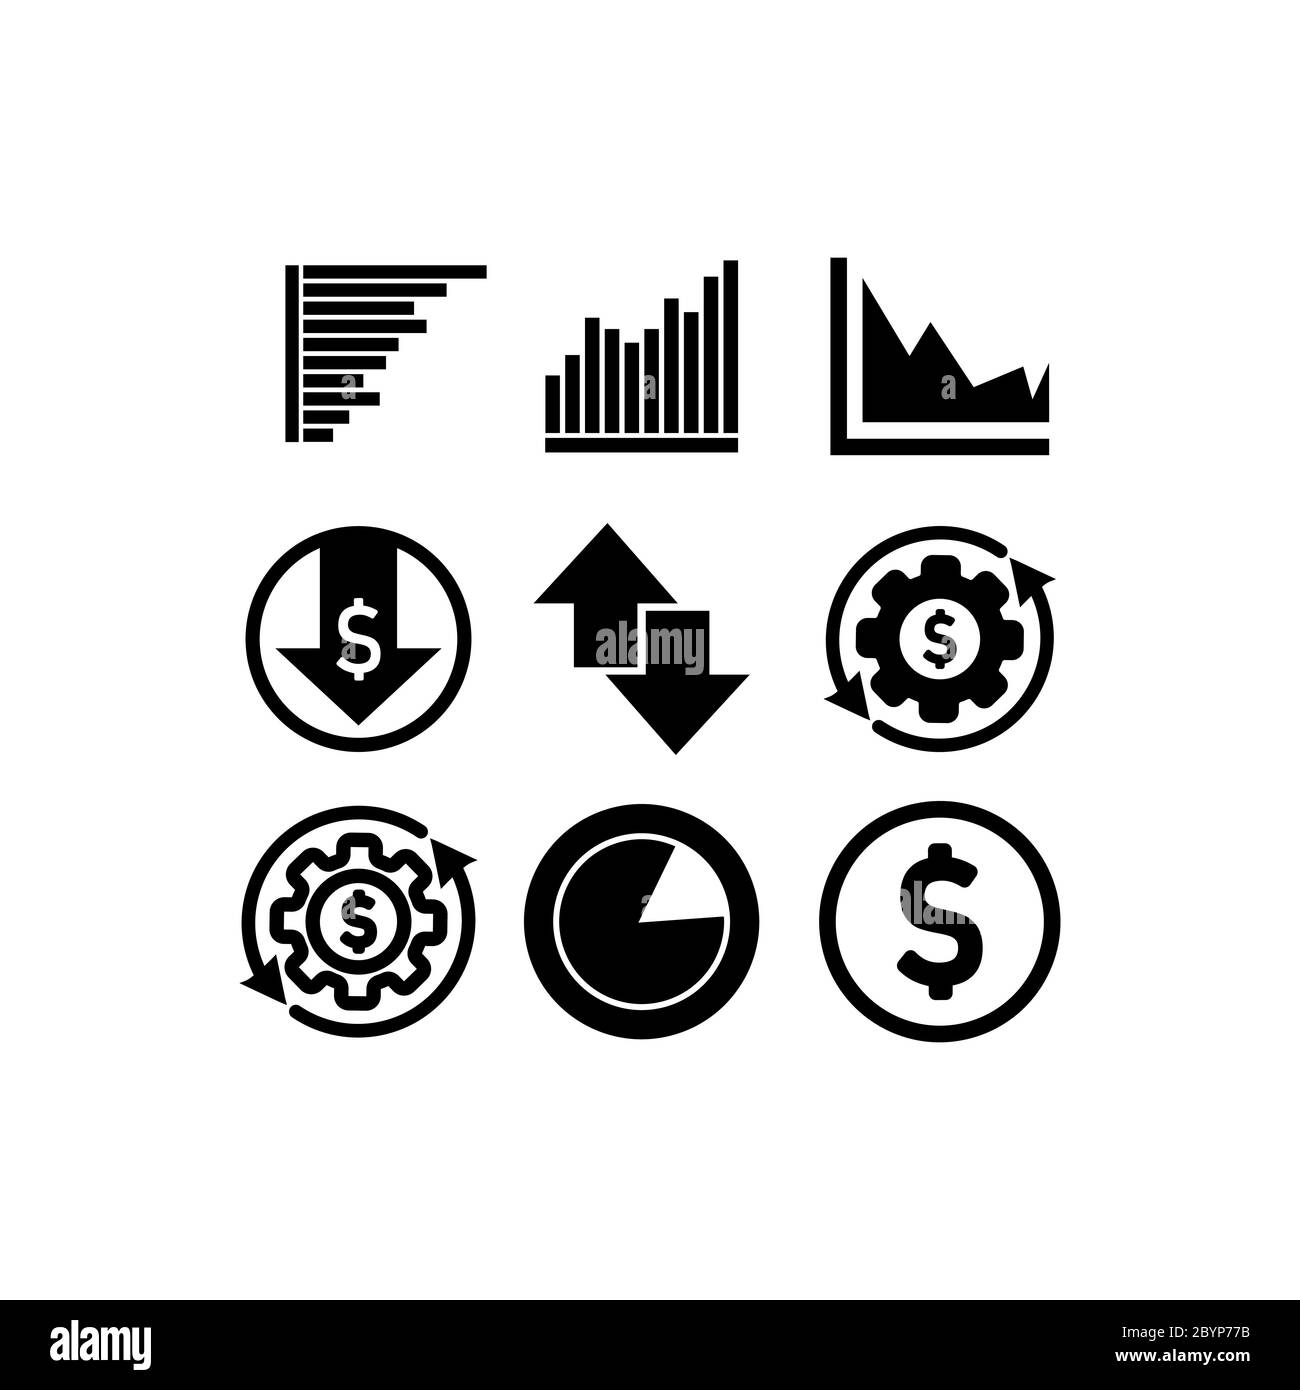 Business Infographic. Money, dollar bill icon. Set of charts and graphs. Statistics, pictogram, data set on isolated white background. EPS 10 vector. Stock Vector